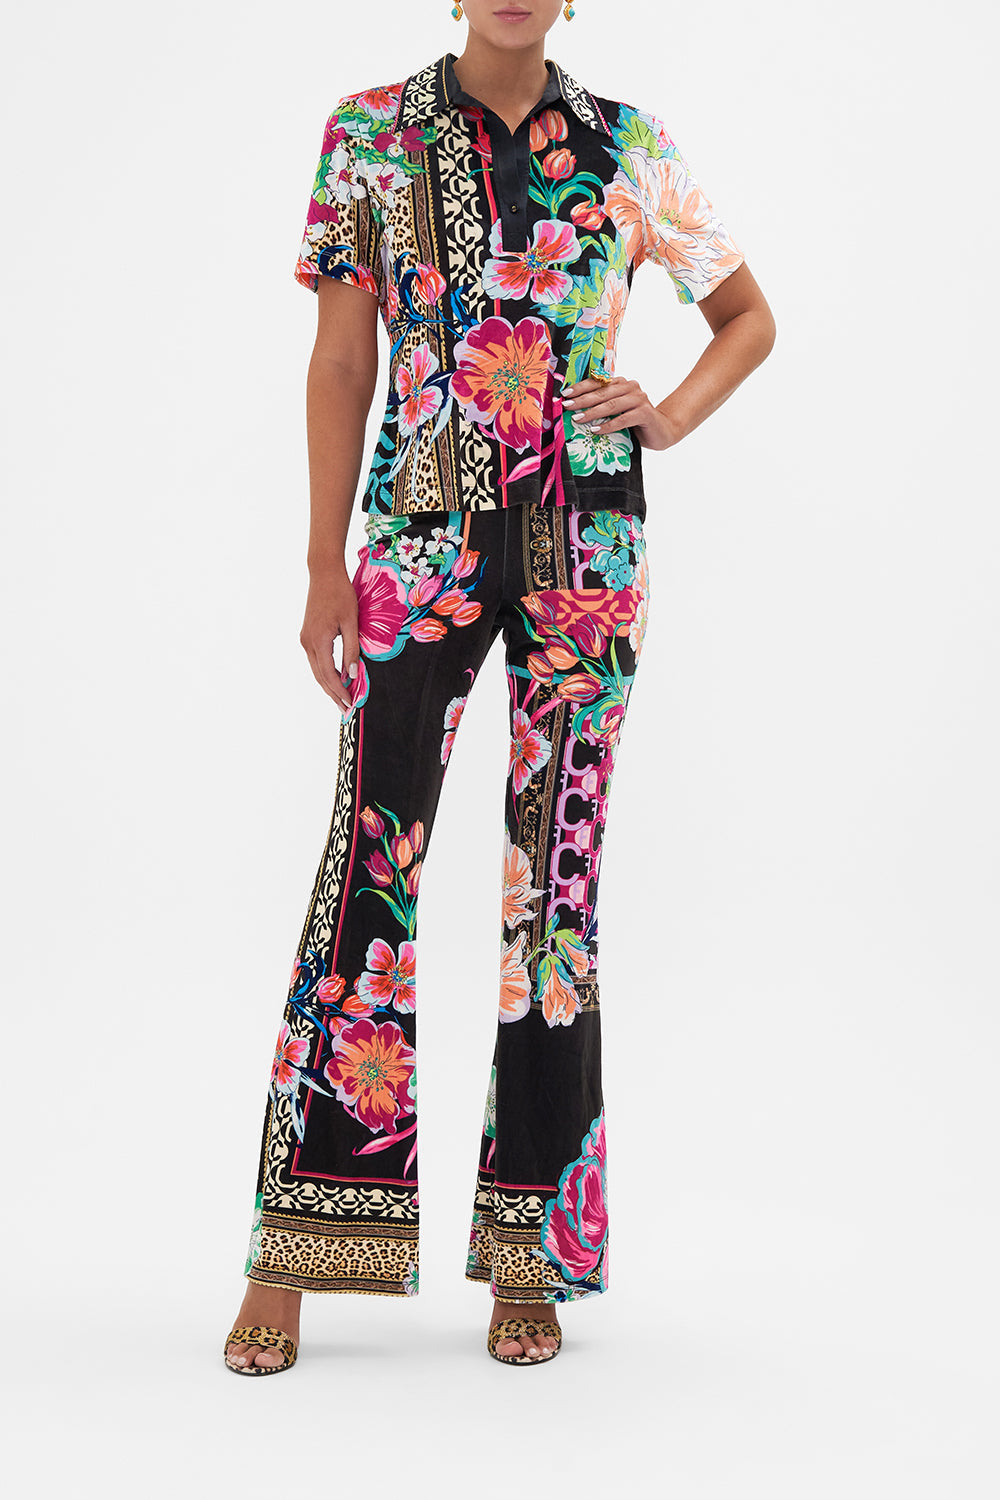 Front view of model wearing CAMILLA printed floral pants in Printed Prima Vera print